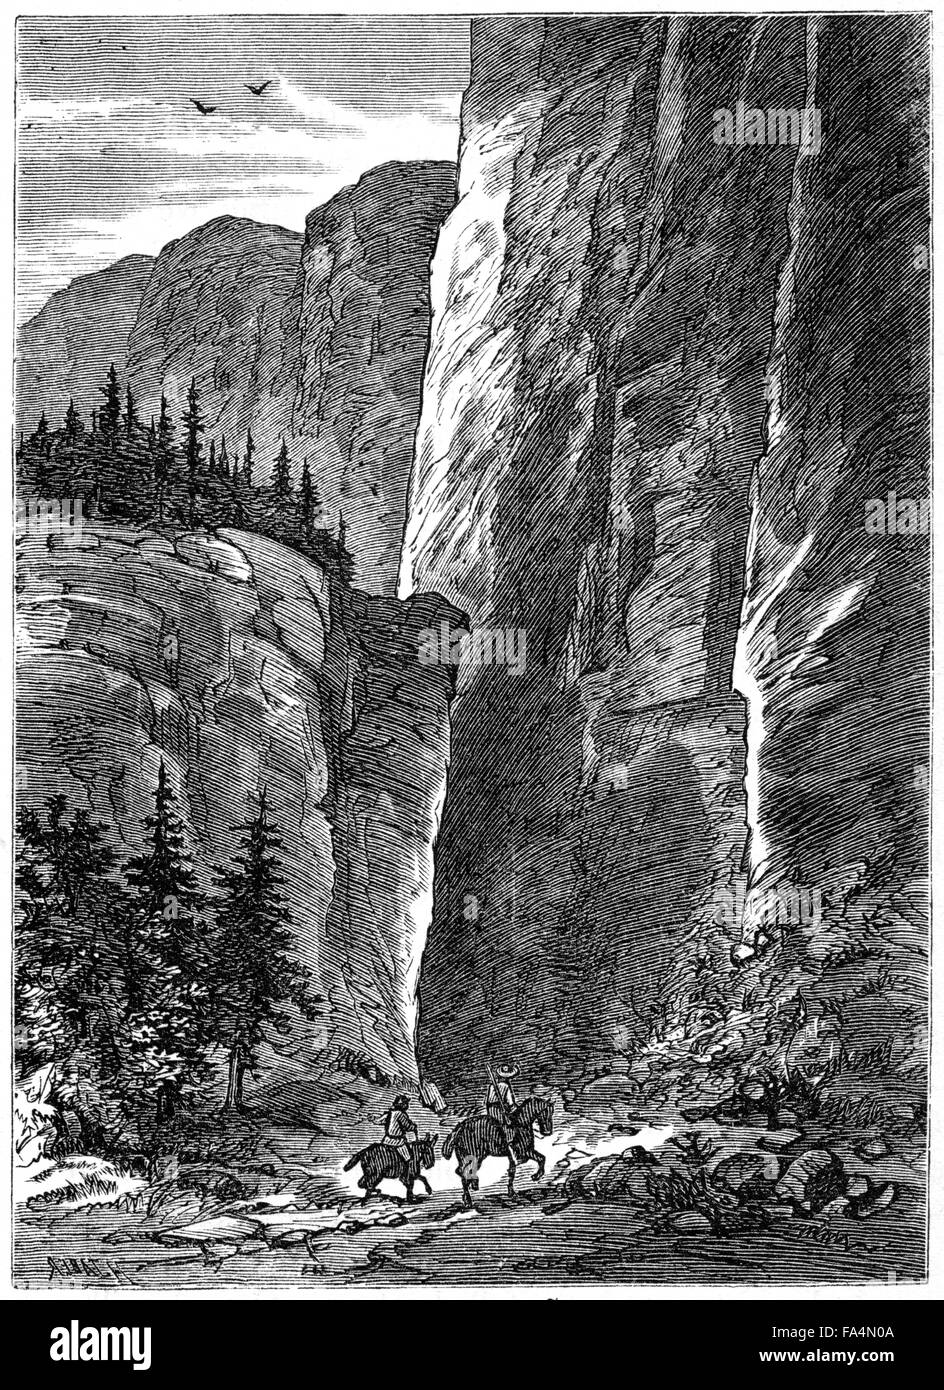 White Bird Canyon, Opening Battle of Nez Perce War, Idaho Territory, 1877, Book Illustration from “Indian Horrors or Massacres of the Red Men”, by Henry Davenport Northrop, 1891 Stock Photo